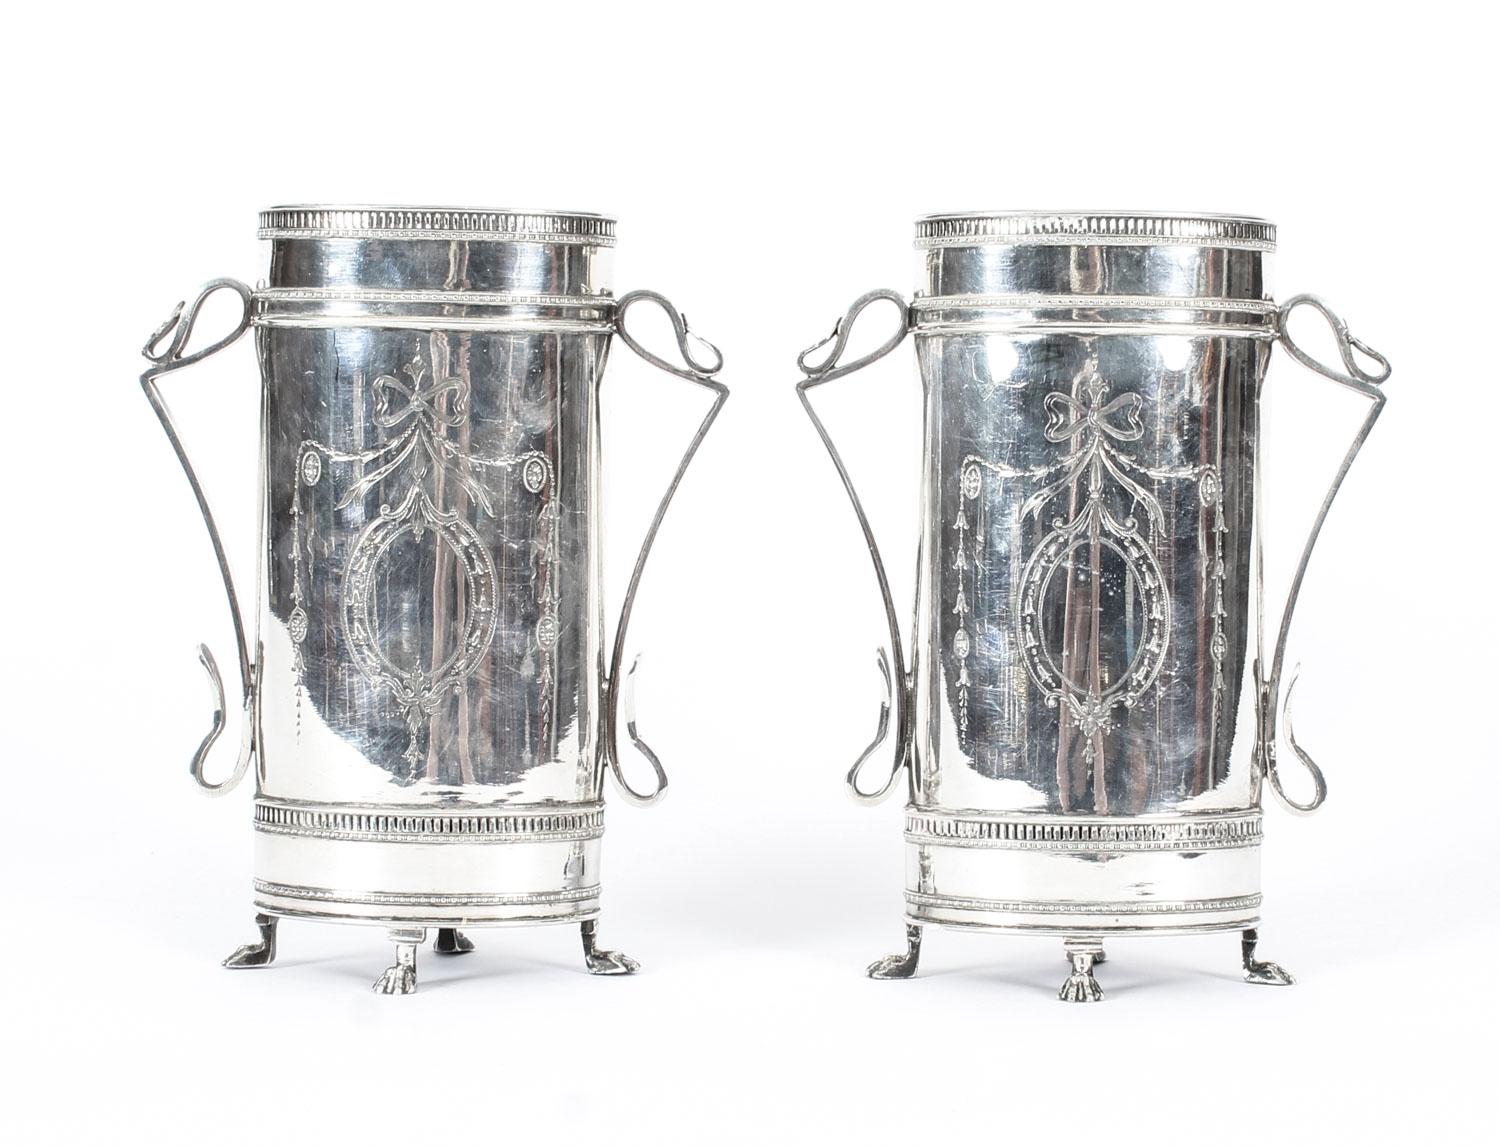 This is a beautiful pair of antique Victorian neoclassical silver plated vases, bearing the silversmith's makers' mark AW & JH, circa 1880 in date.
 
The oval vases features elegant engraved ribbon decorations to the body with pierced rims, finely